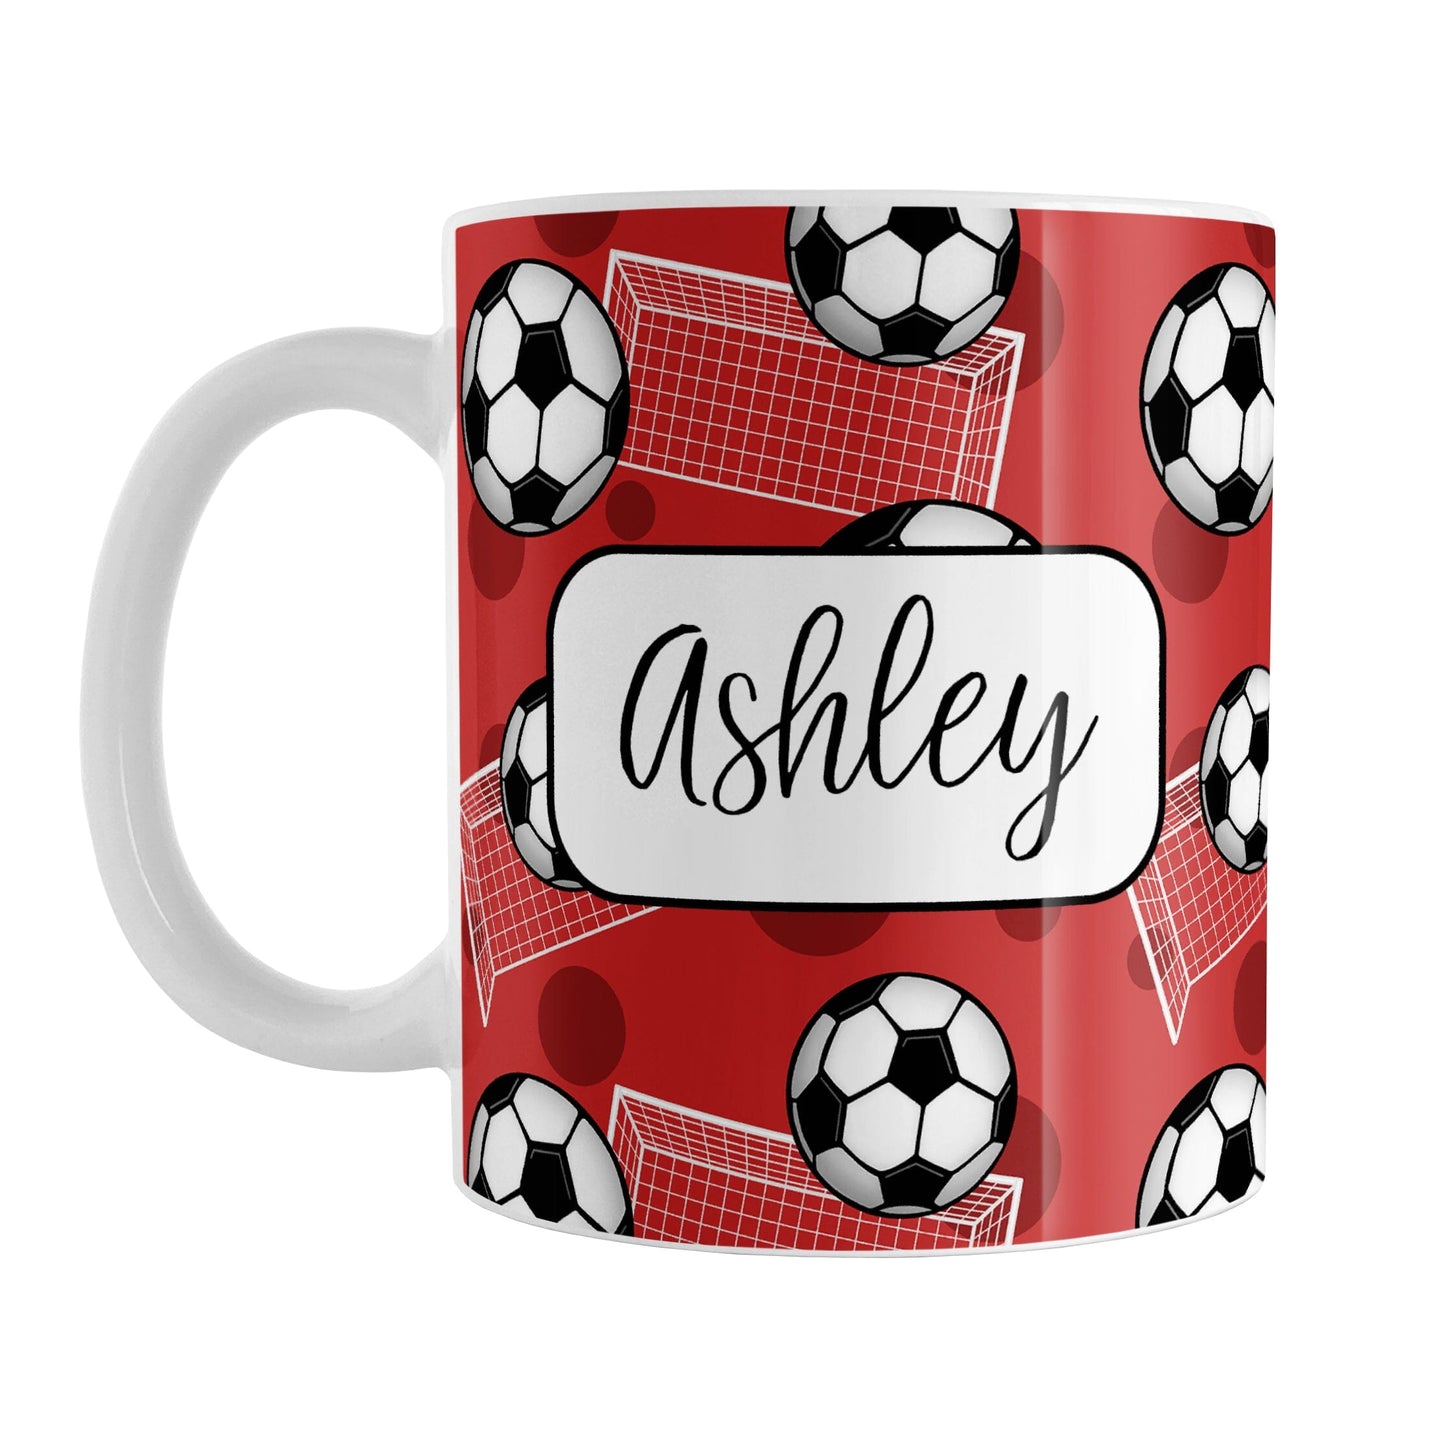 Soccer Ball and Goal Personalized Red Soccer Mug (11oz) at Amy's Coffee Mugs. A ceramic coffee mug designed with a pattern of soccer balls and white soccer goals over a red background with red circles. Your personalized name is custom-printed in a fun black script font on both sides of the mug over the soccer pattern. 